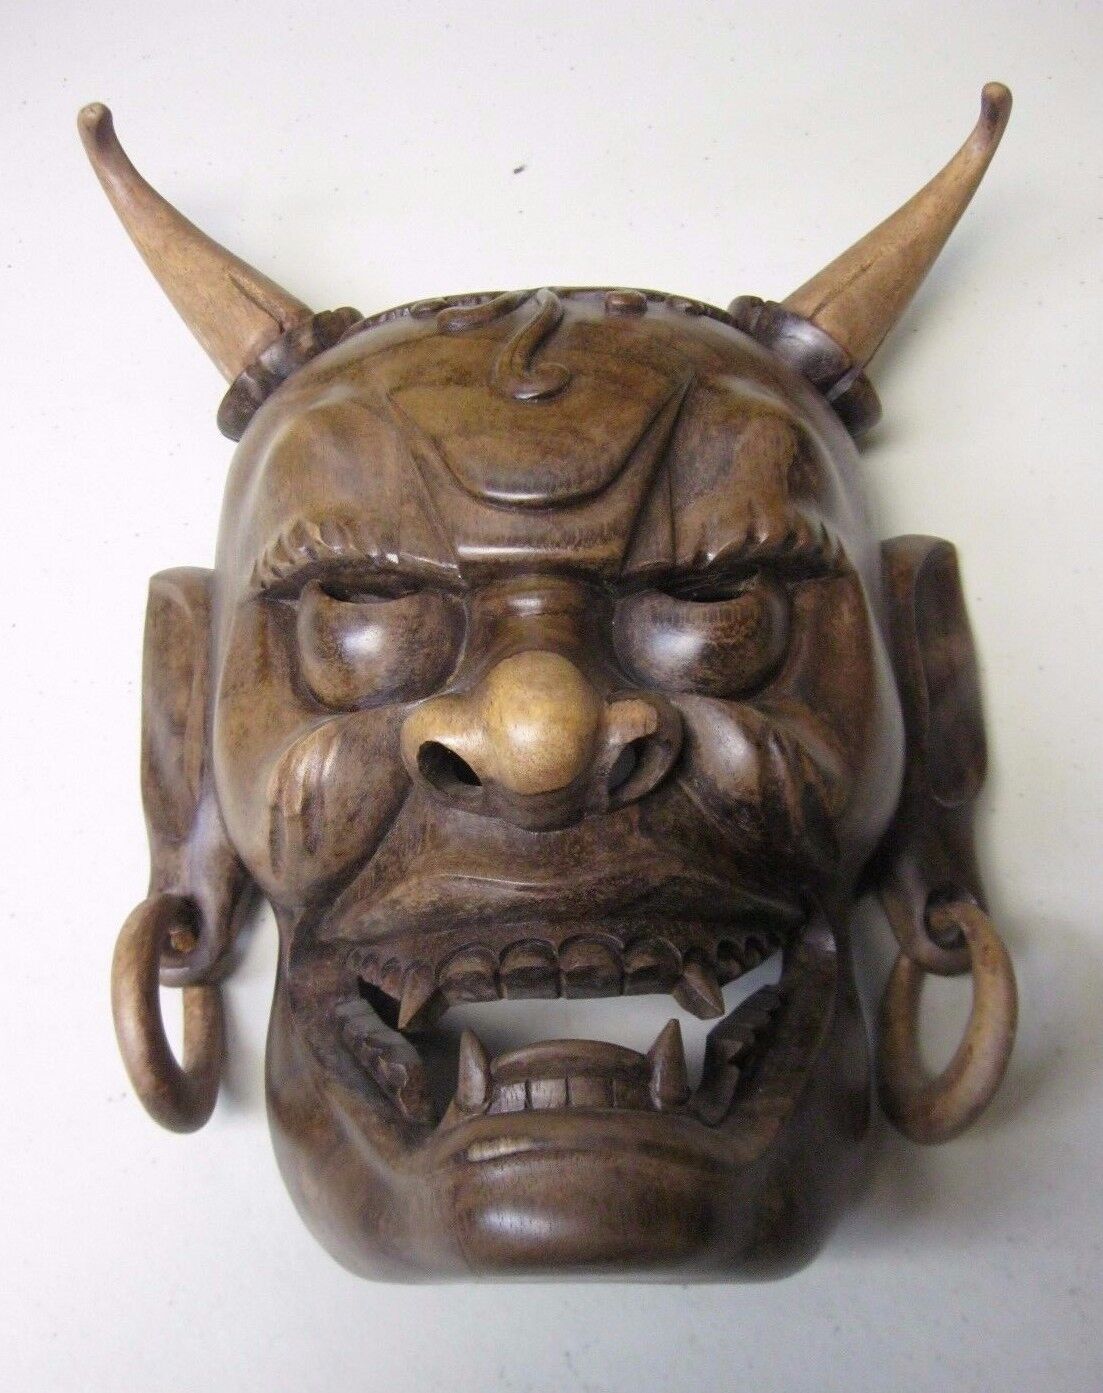 Balinese Wood Hand Carved Evil Warrior Mask From Indonesia - Approx 10"